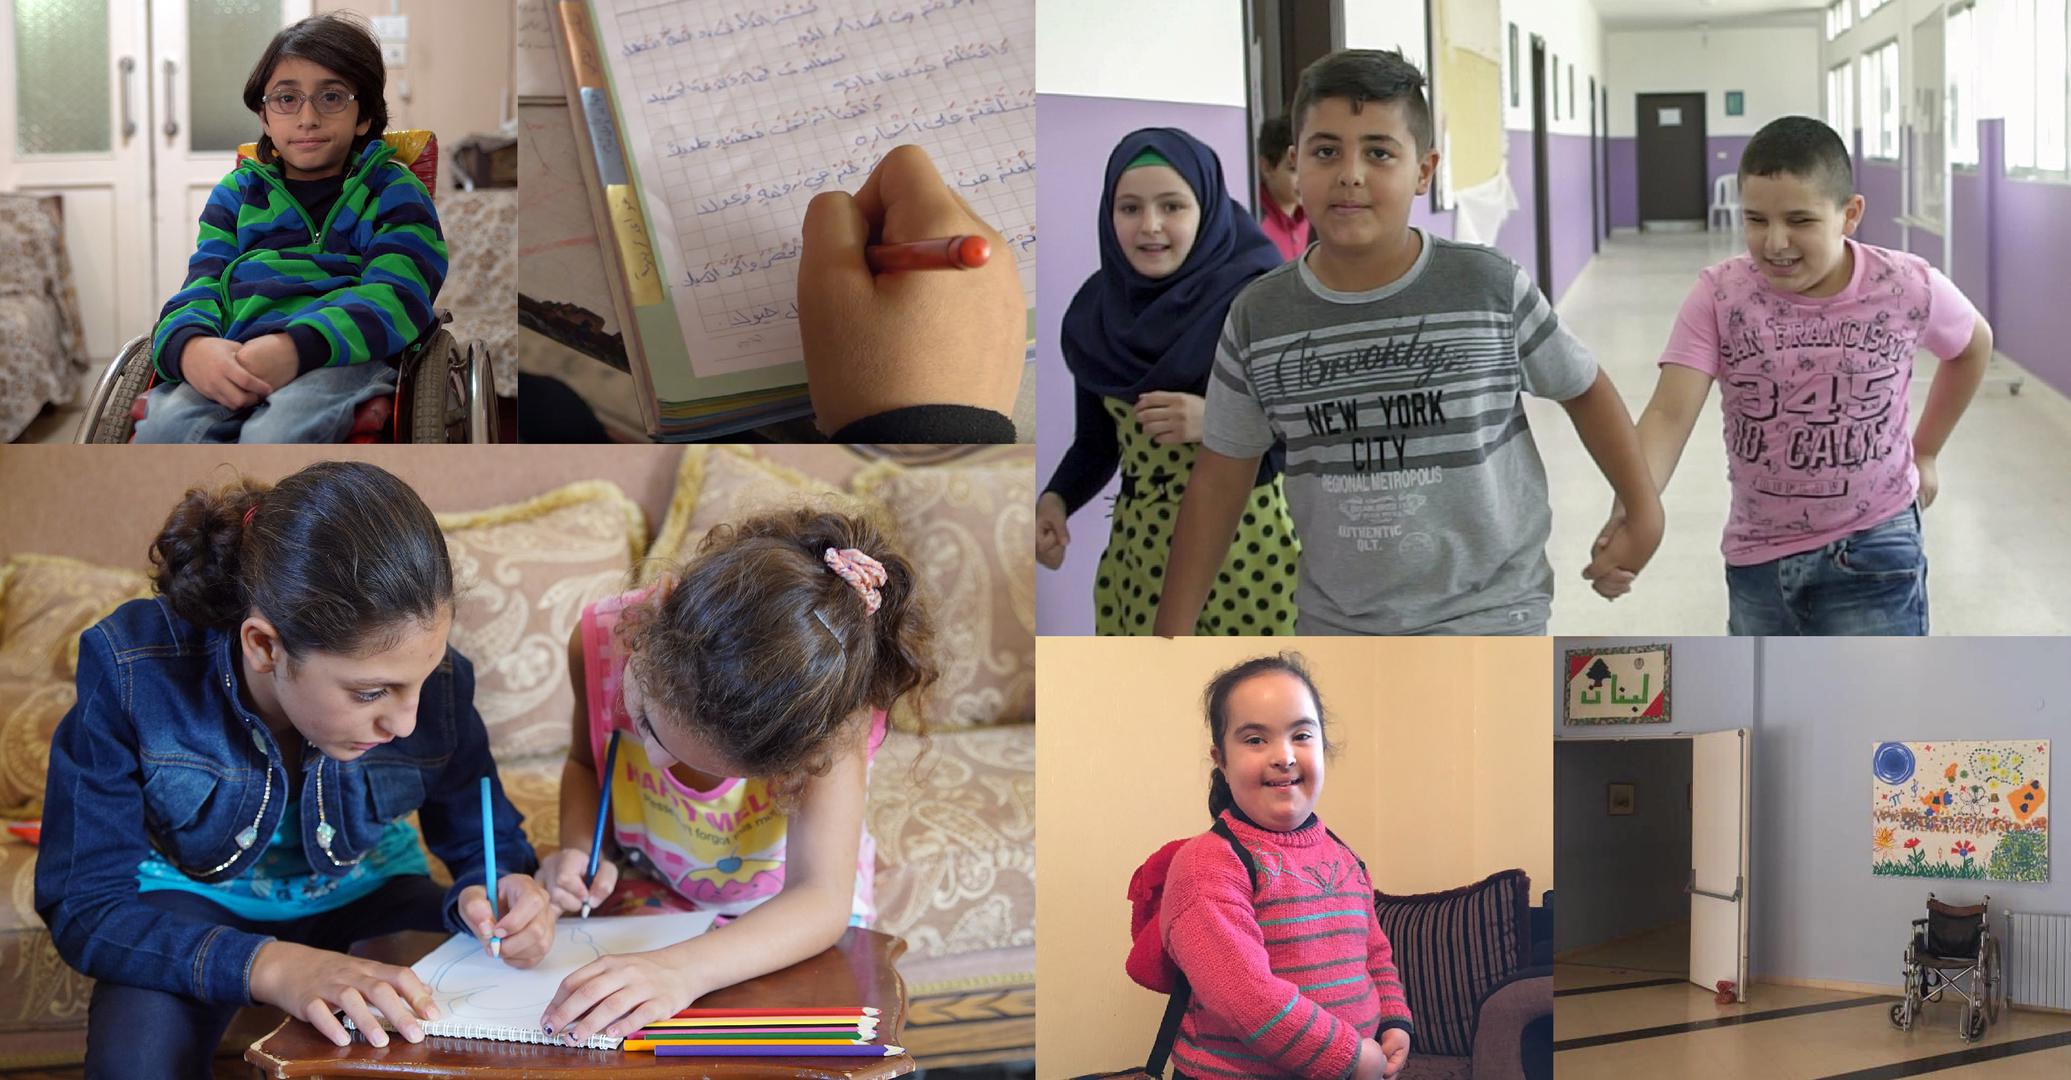 Lebanon: People with Disabilities Overlooked in Covid-19